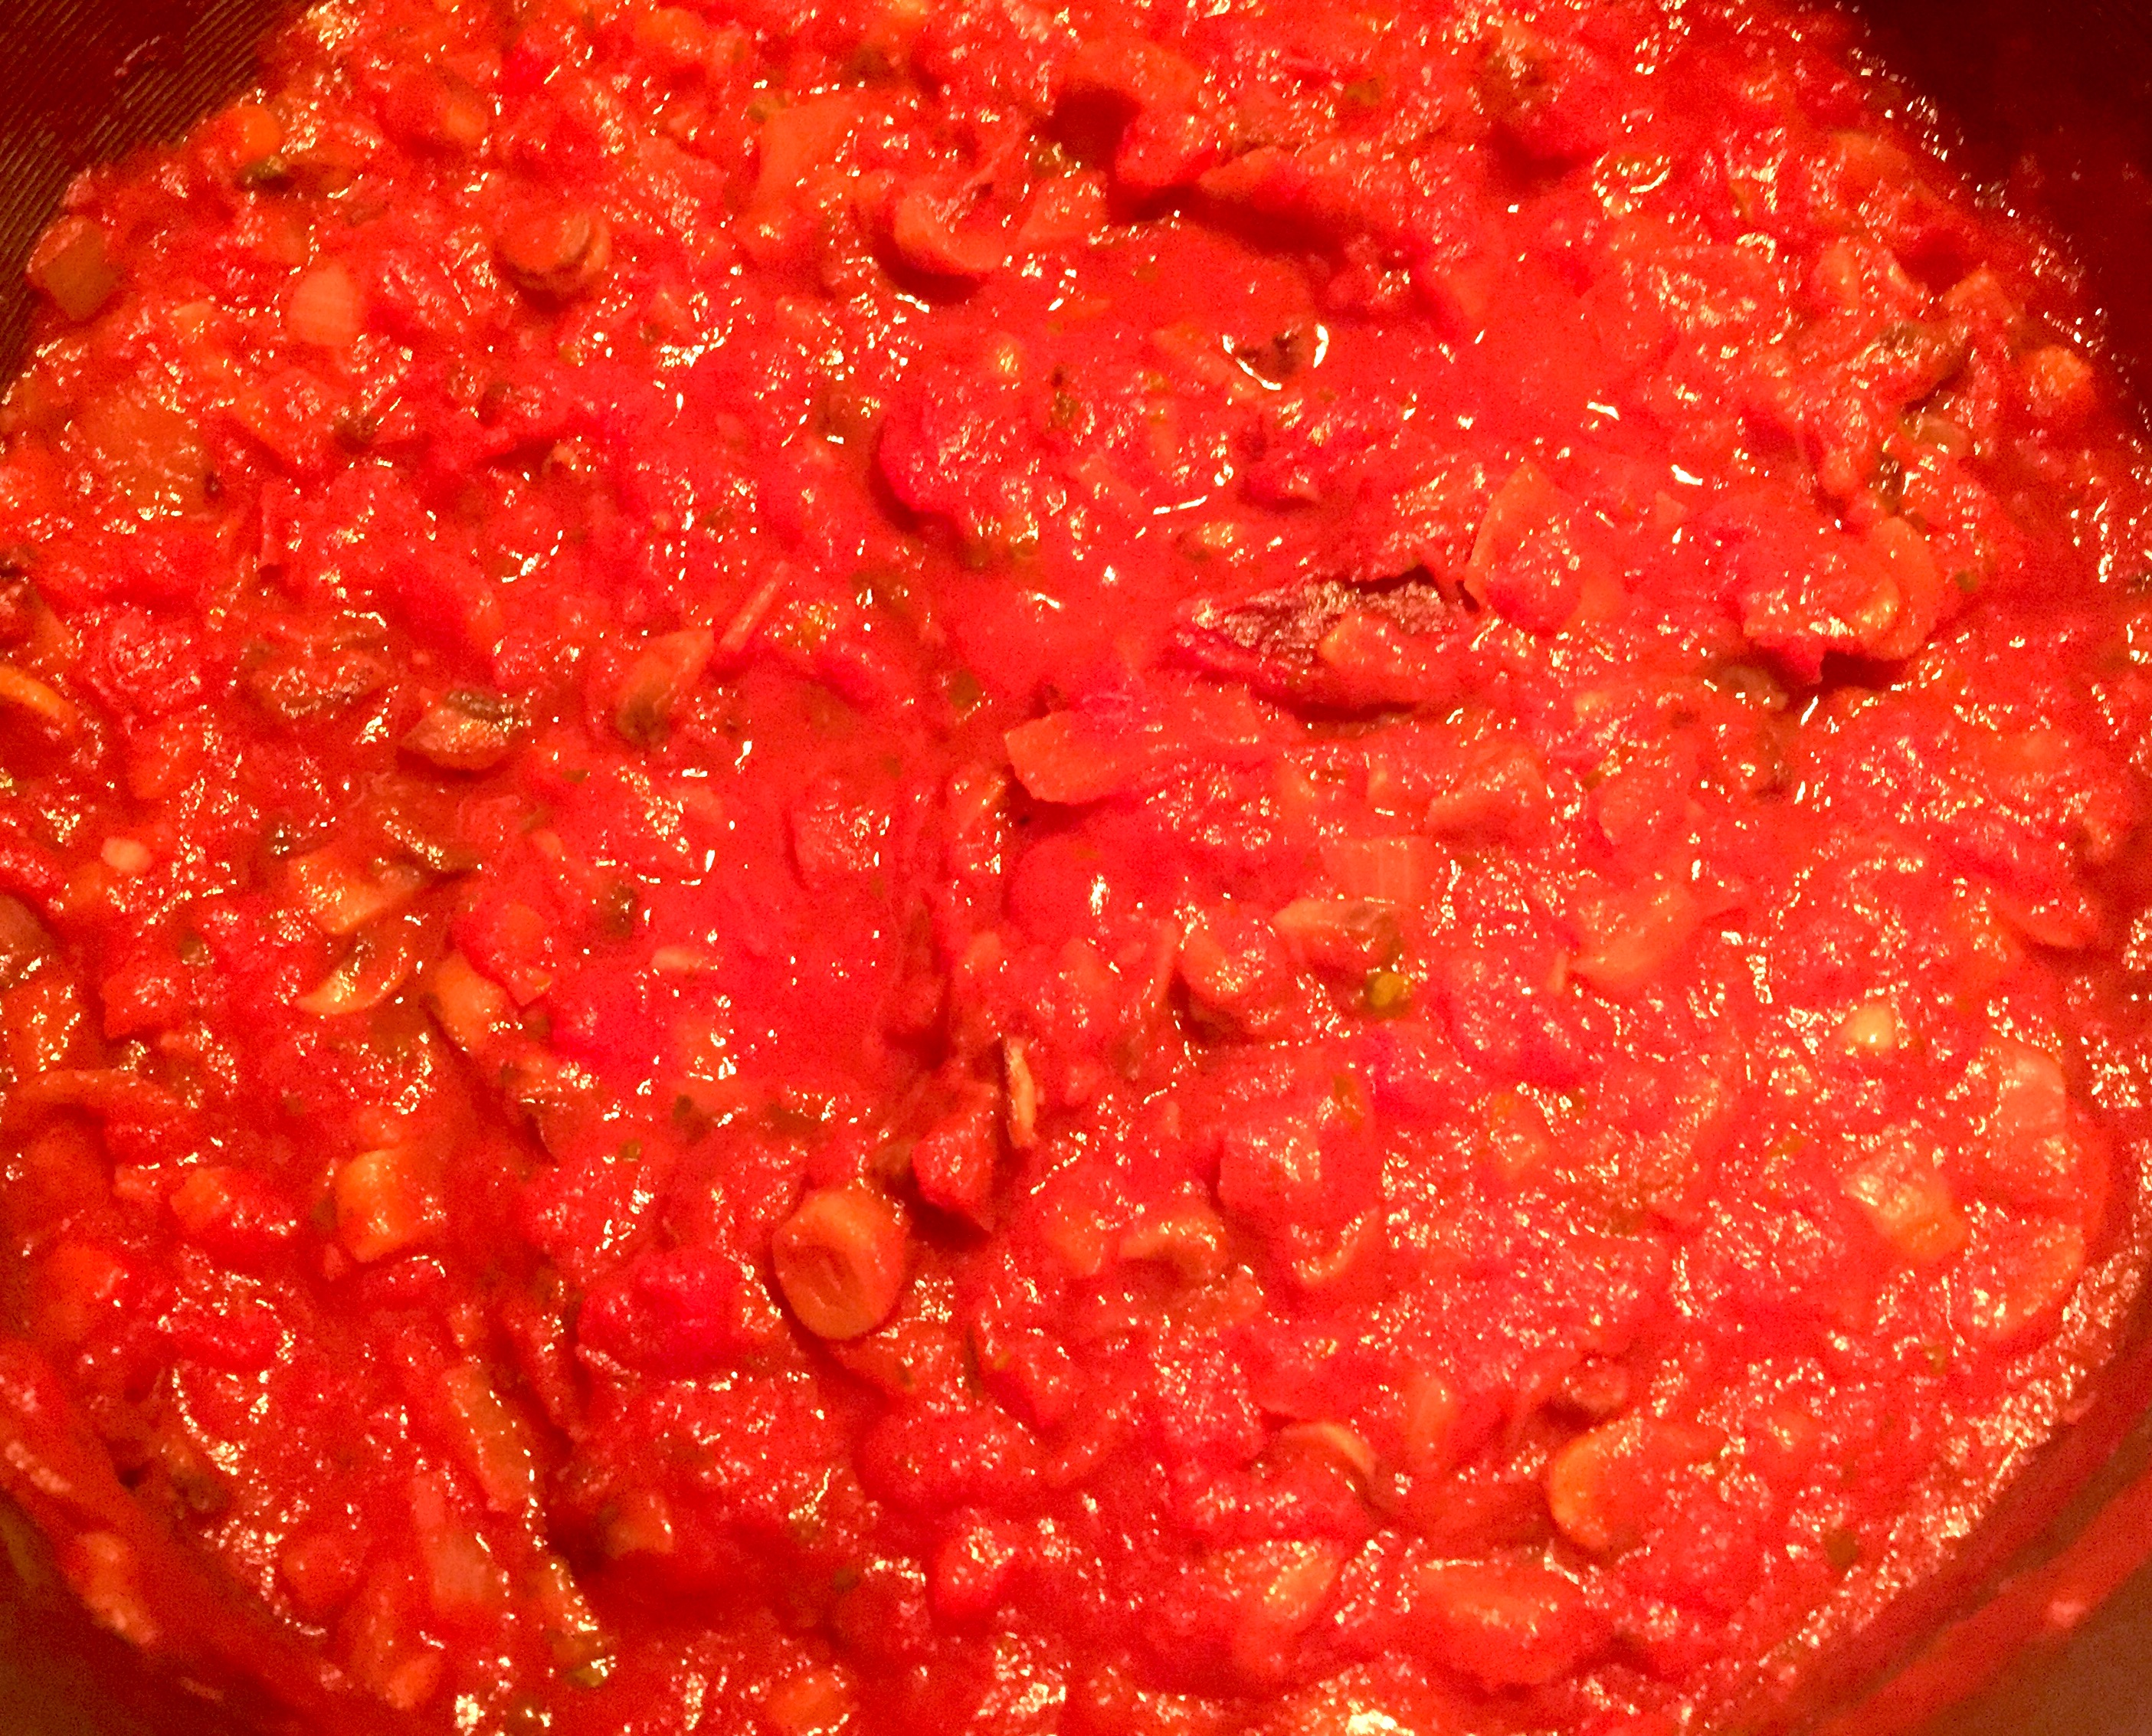 Some homemade vegetarian spaghetti sauce, perfect time to make some sloppy joe baguettes, among other things of course